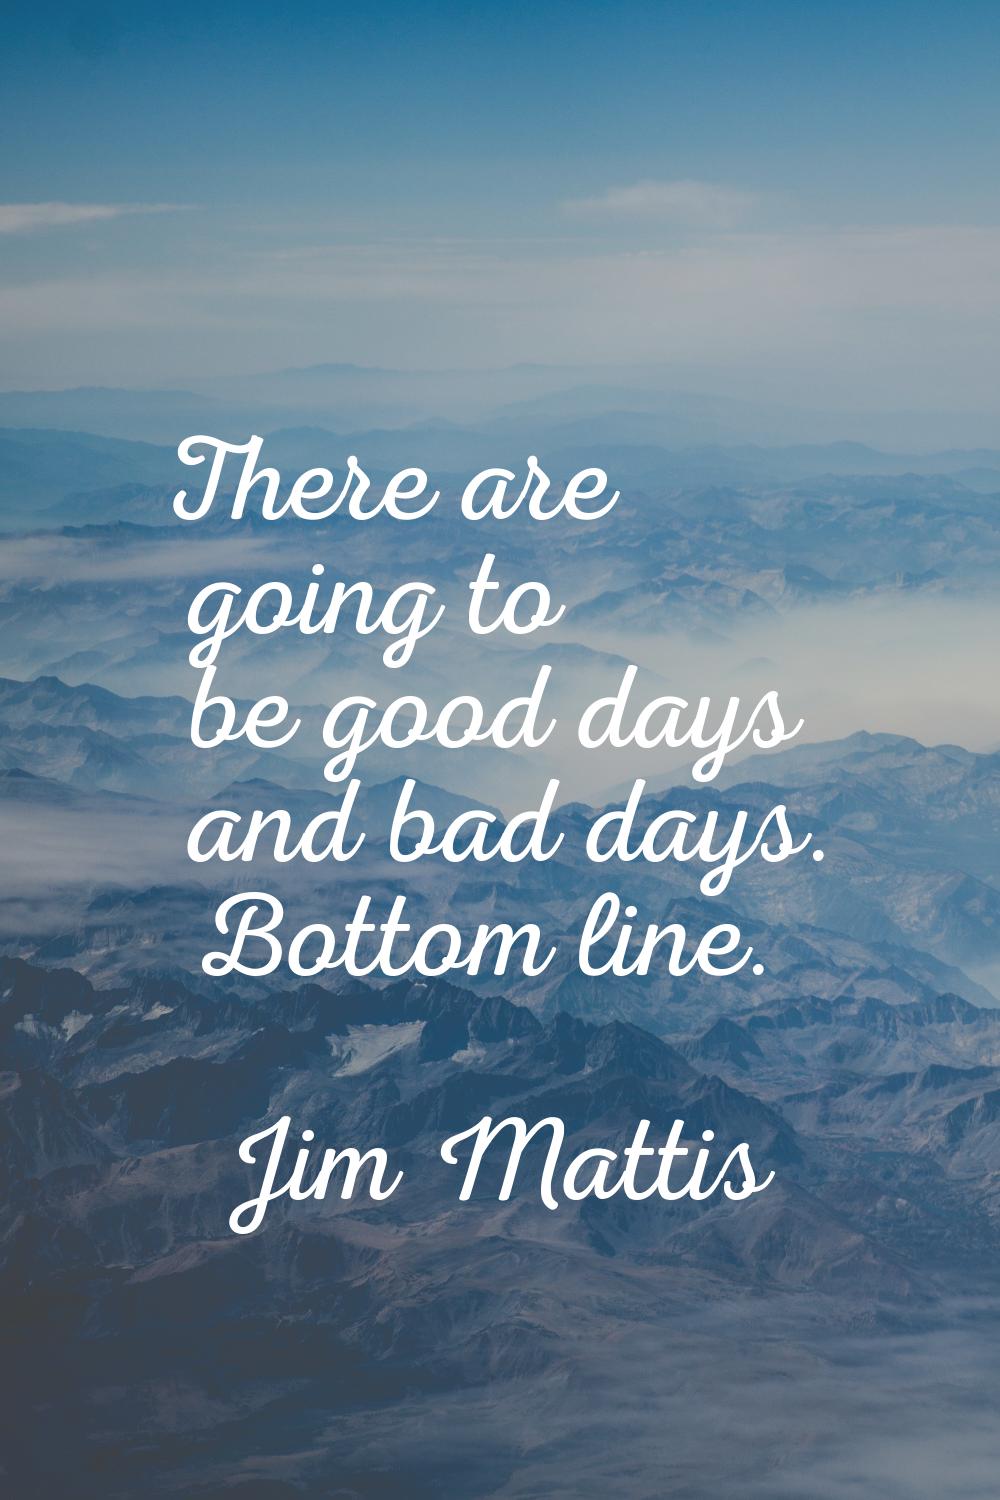 There are going to be good days and bad days. Bottom line.